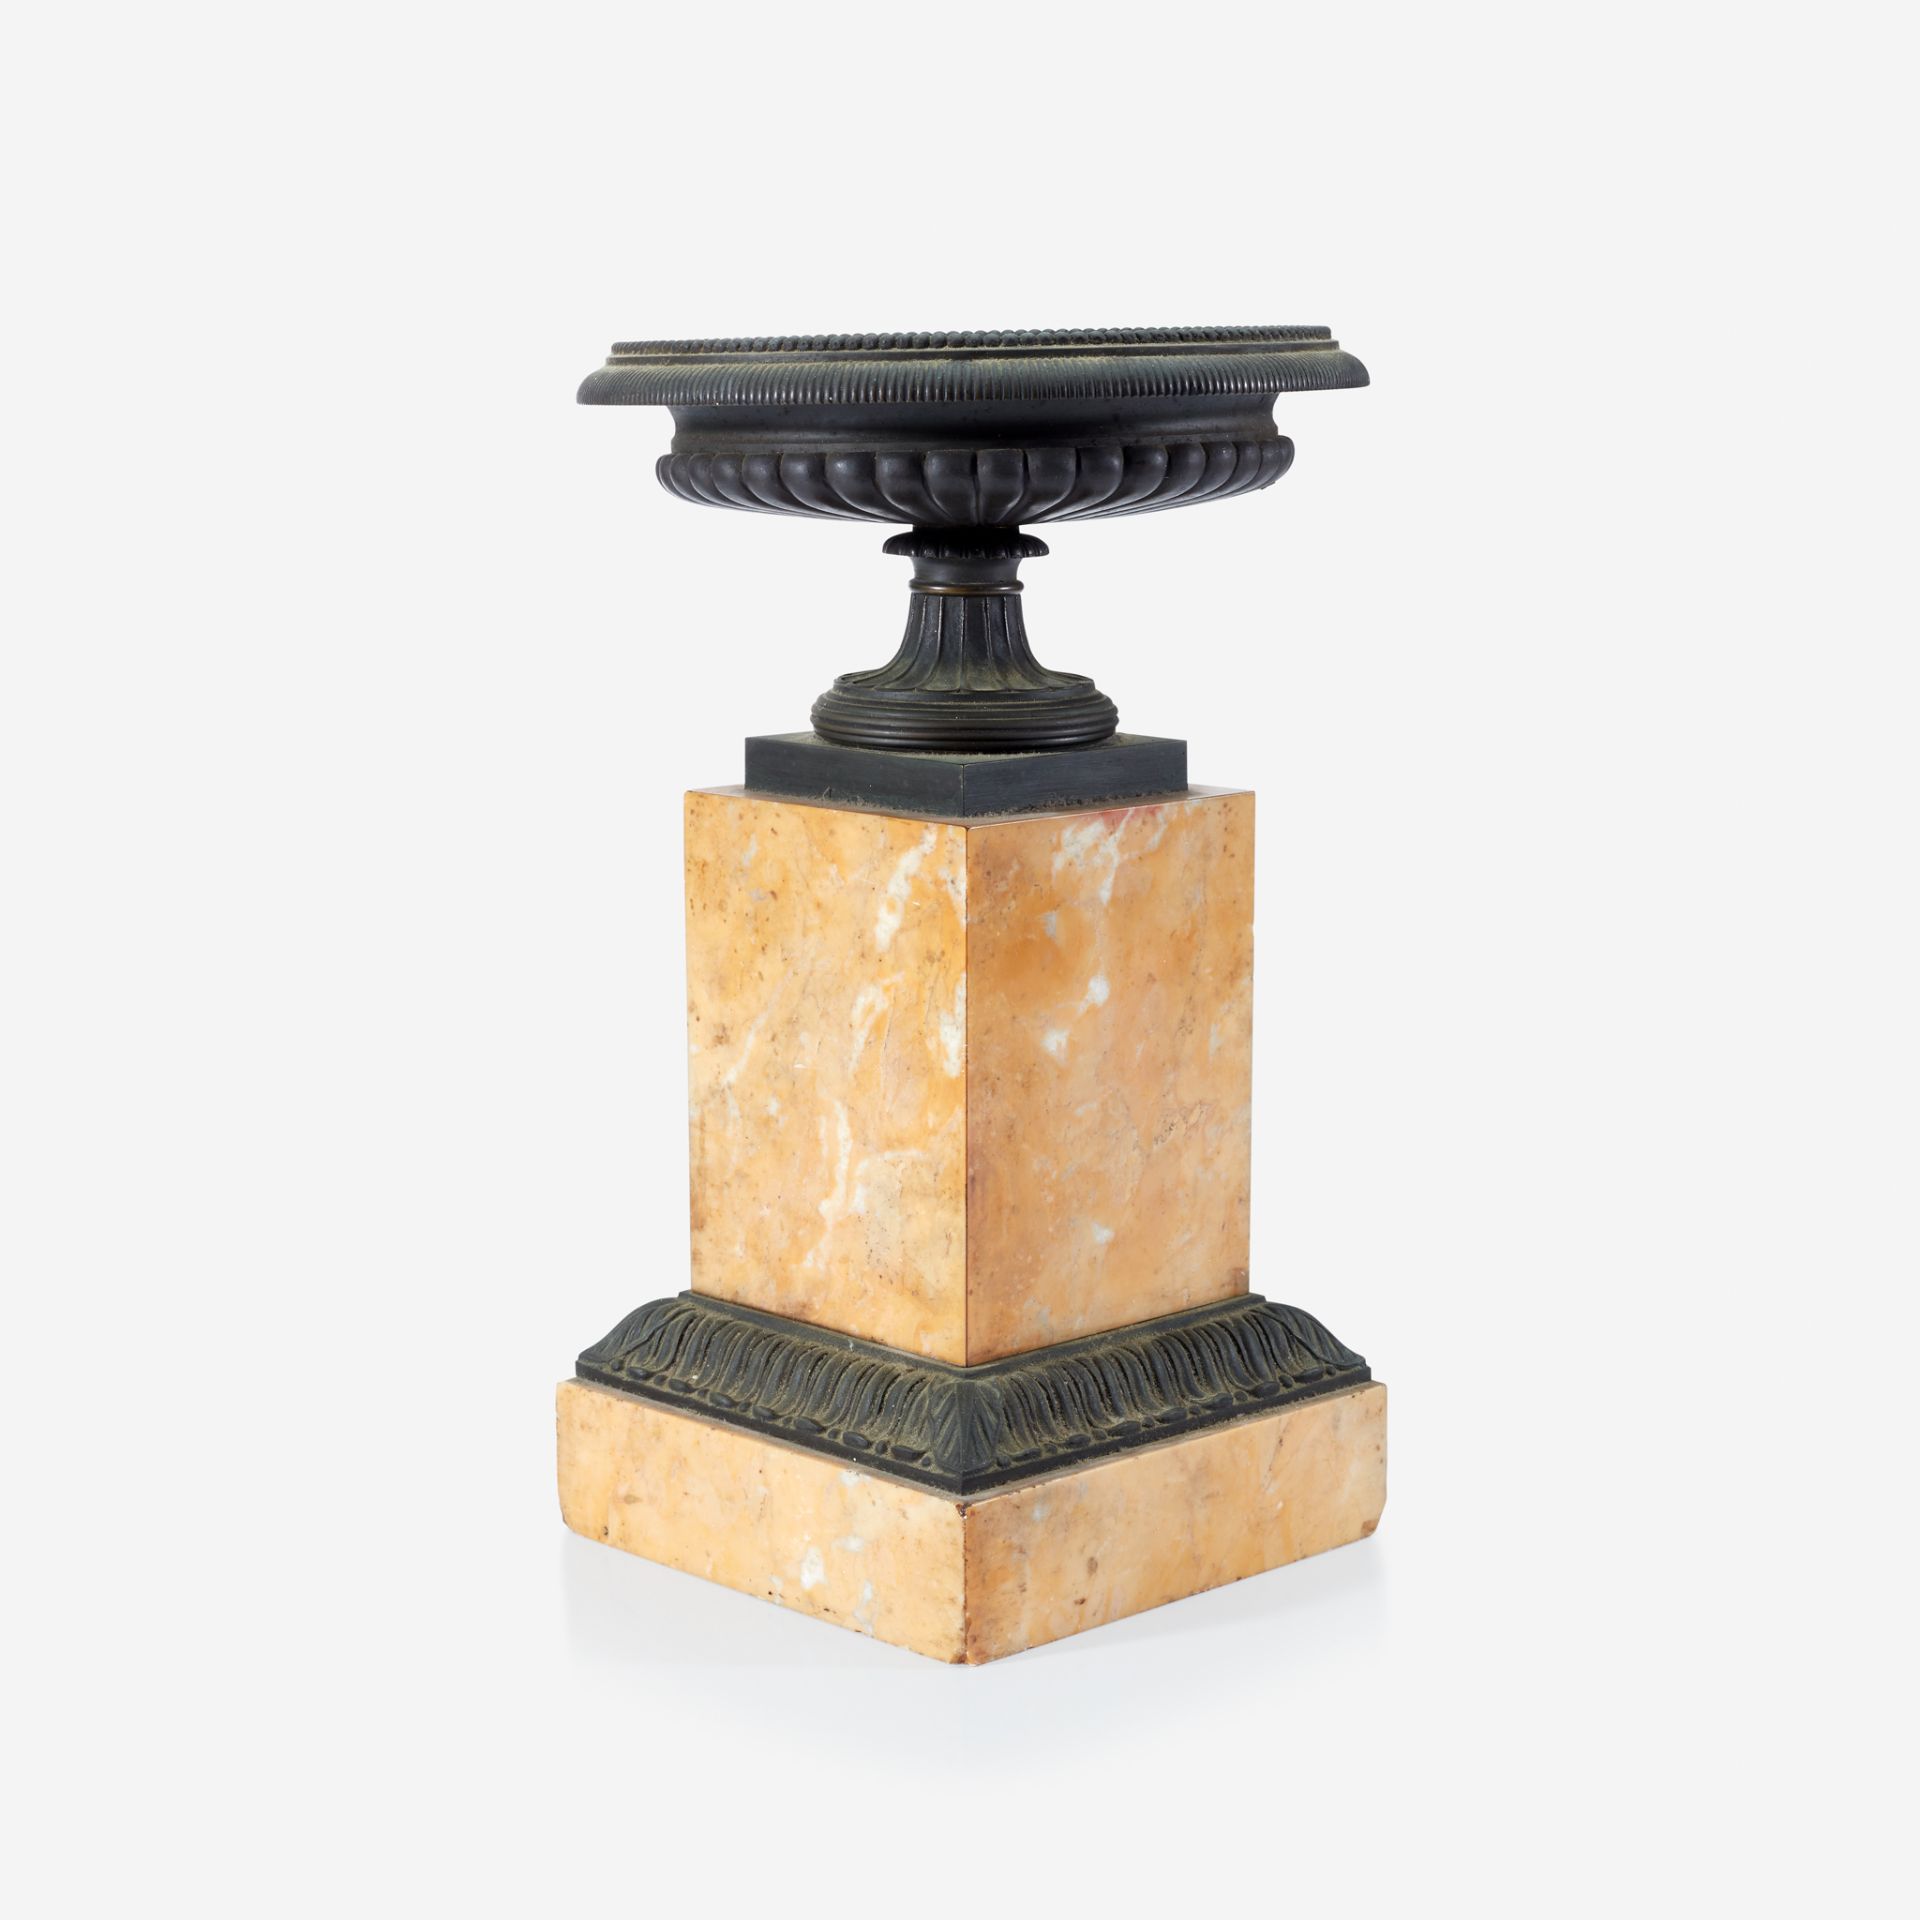 A Grand Tour patinated bronze campana urn on Siena marble pedestal, 19th century - Image 2 of 2